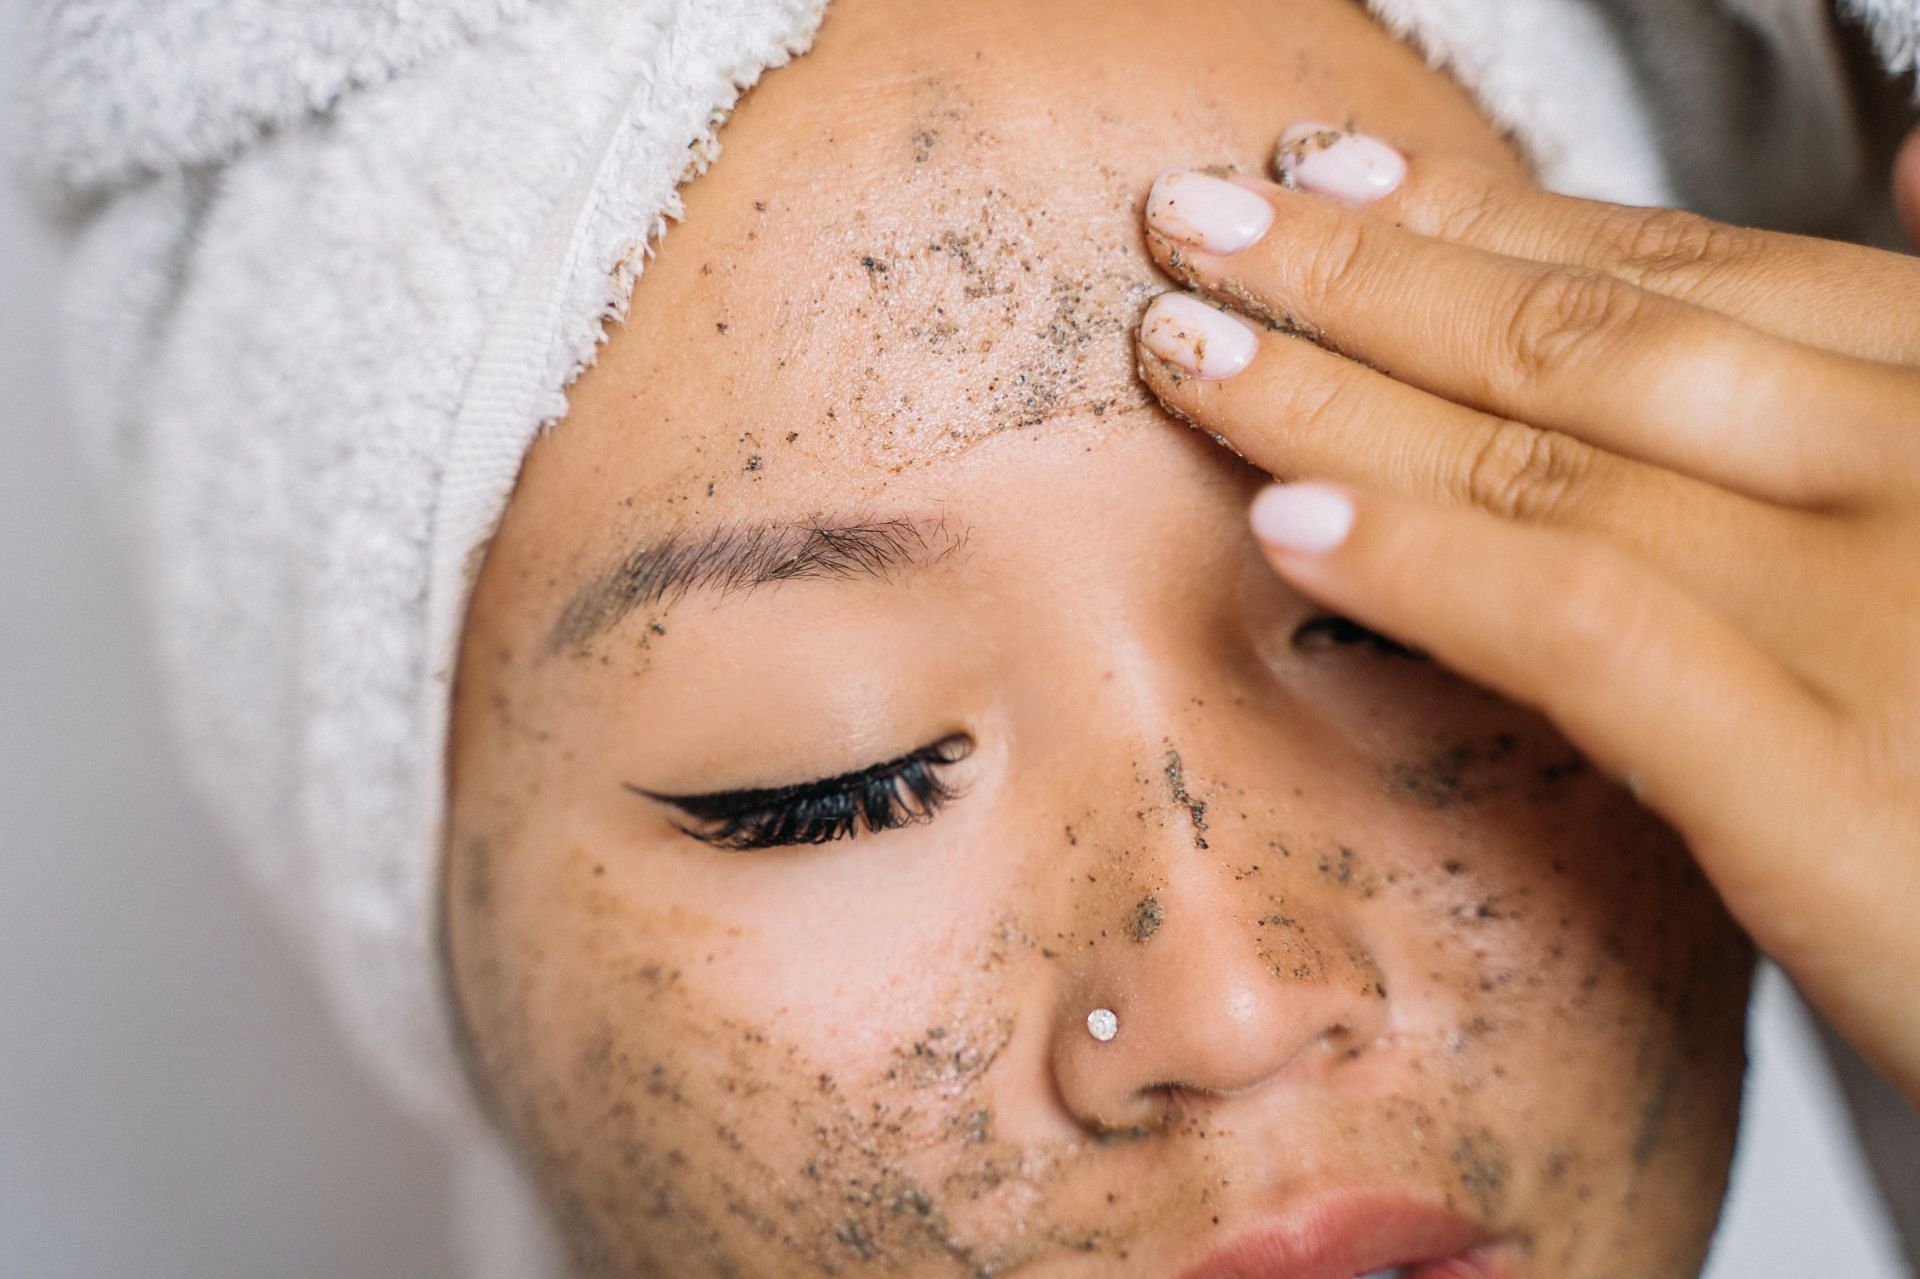 Scrub your face to get rid of excess oil (Image via Pexels)